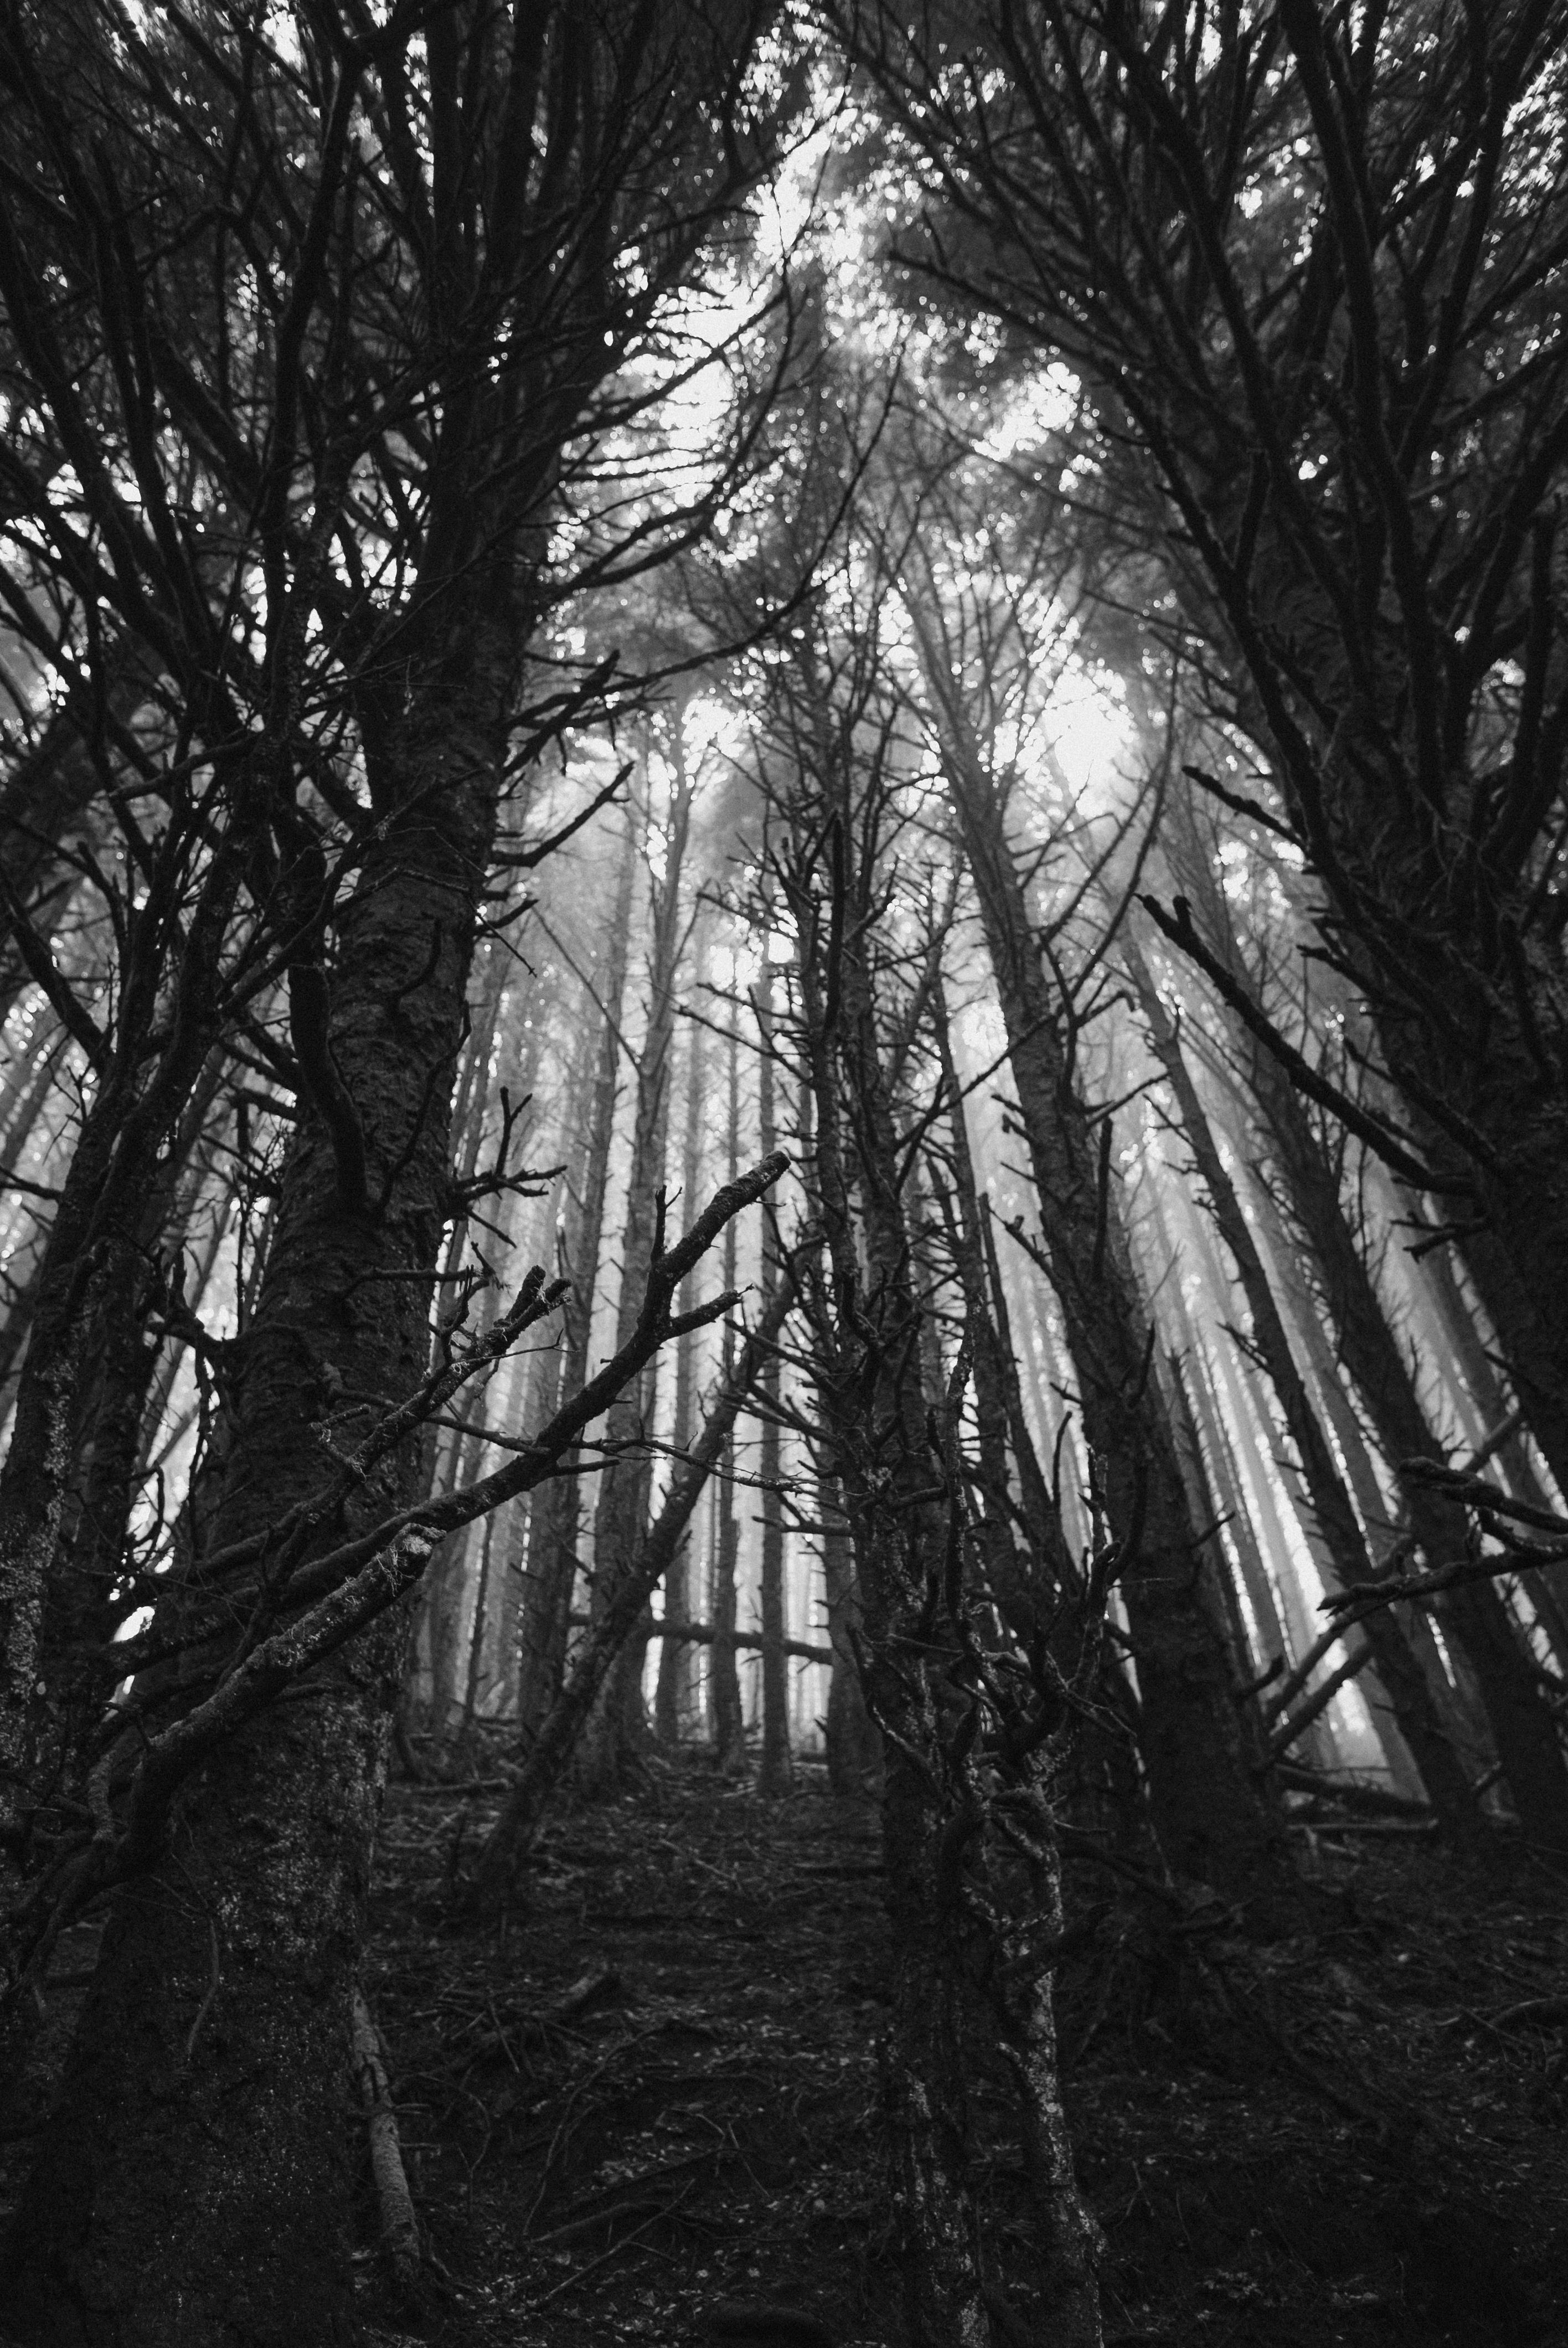 grayscale photo of bare trees in a foggy woods